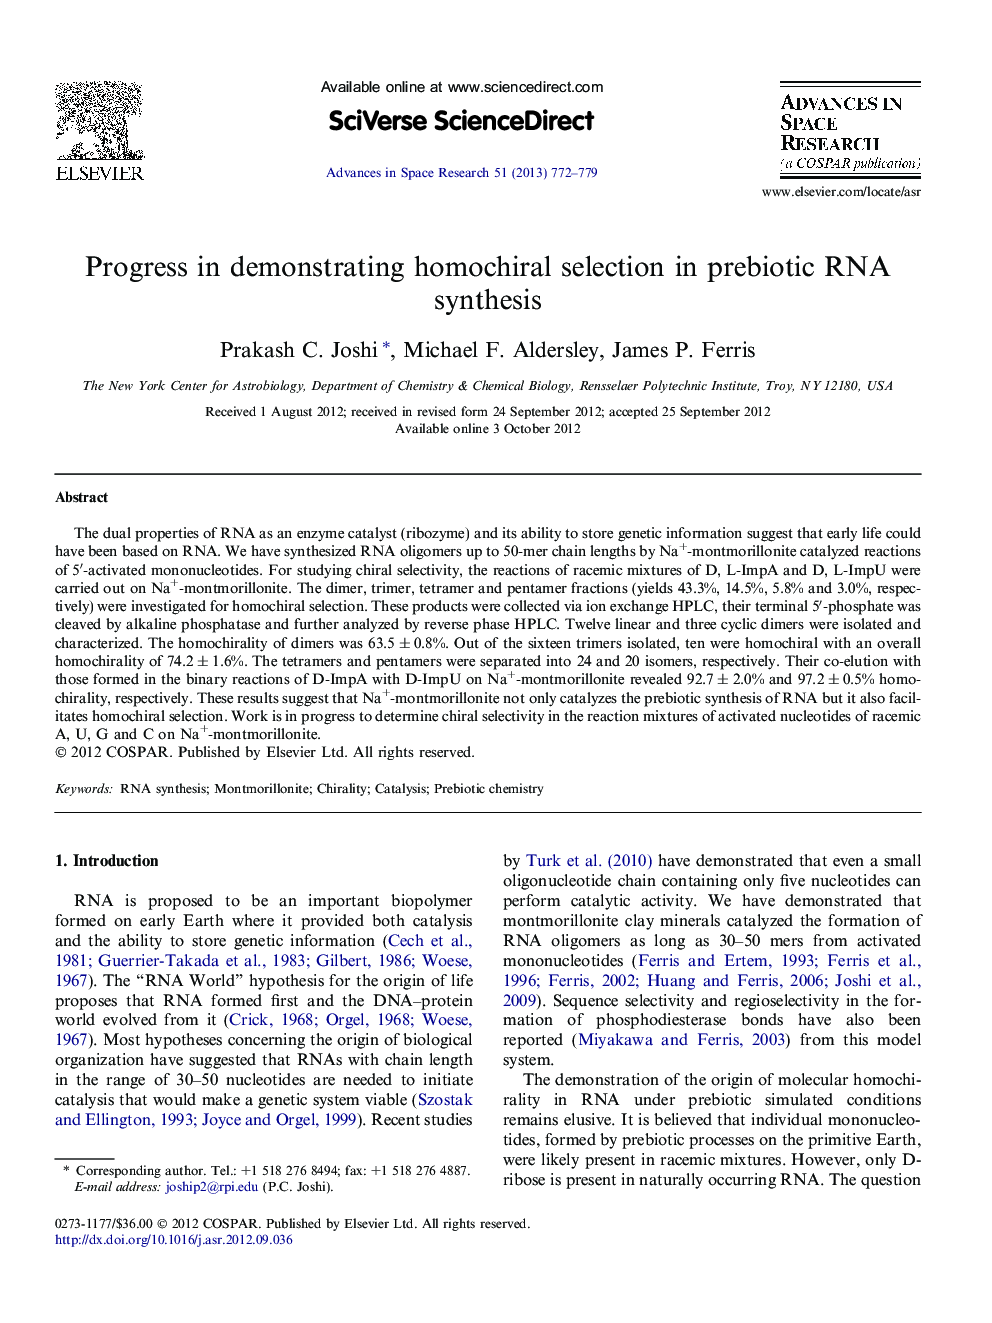 Progress in demonstrating homochiral selection in prebiotic RNA synthesis